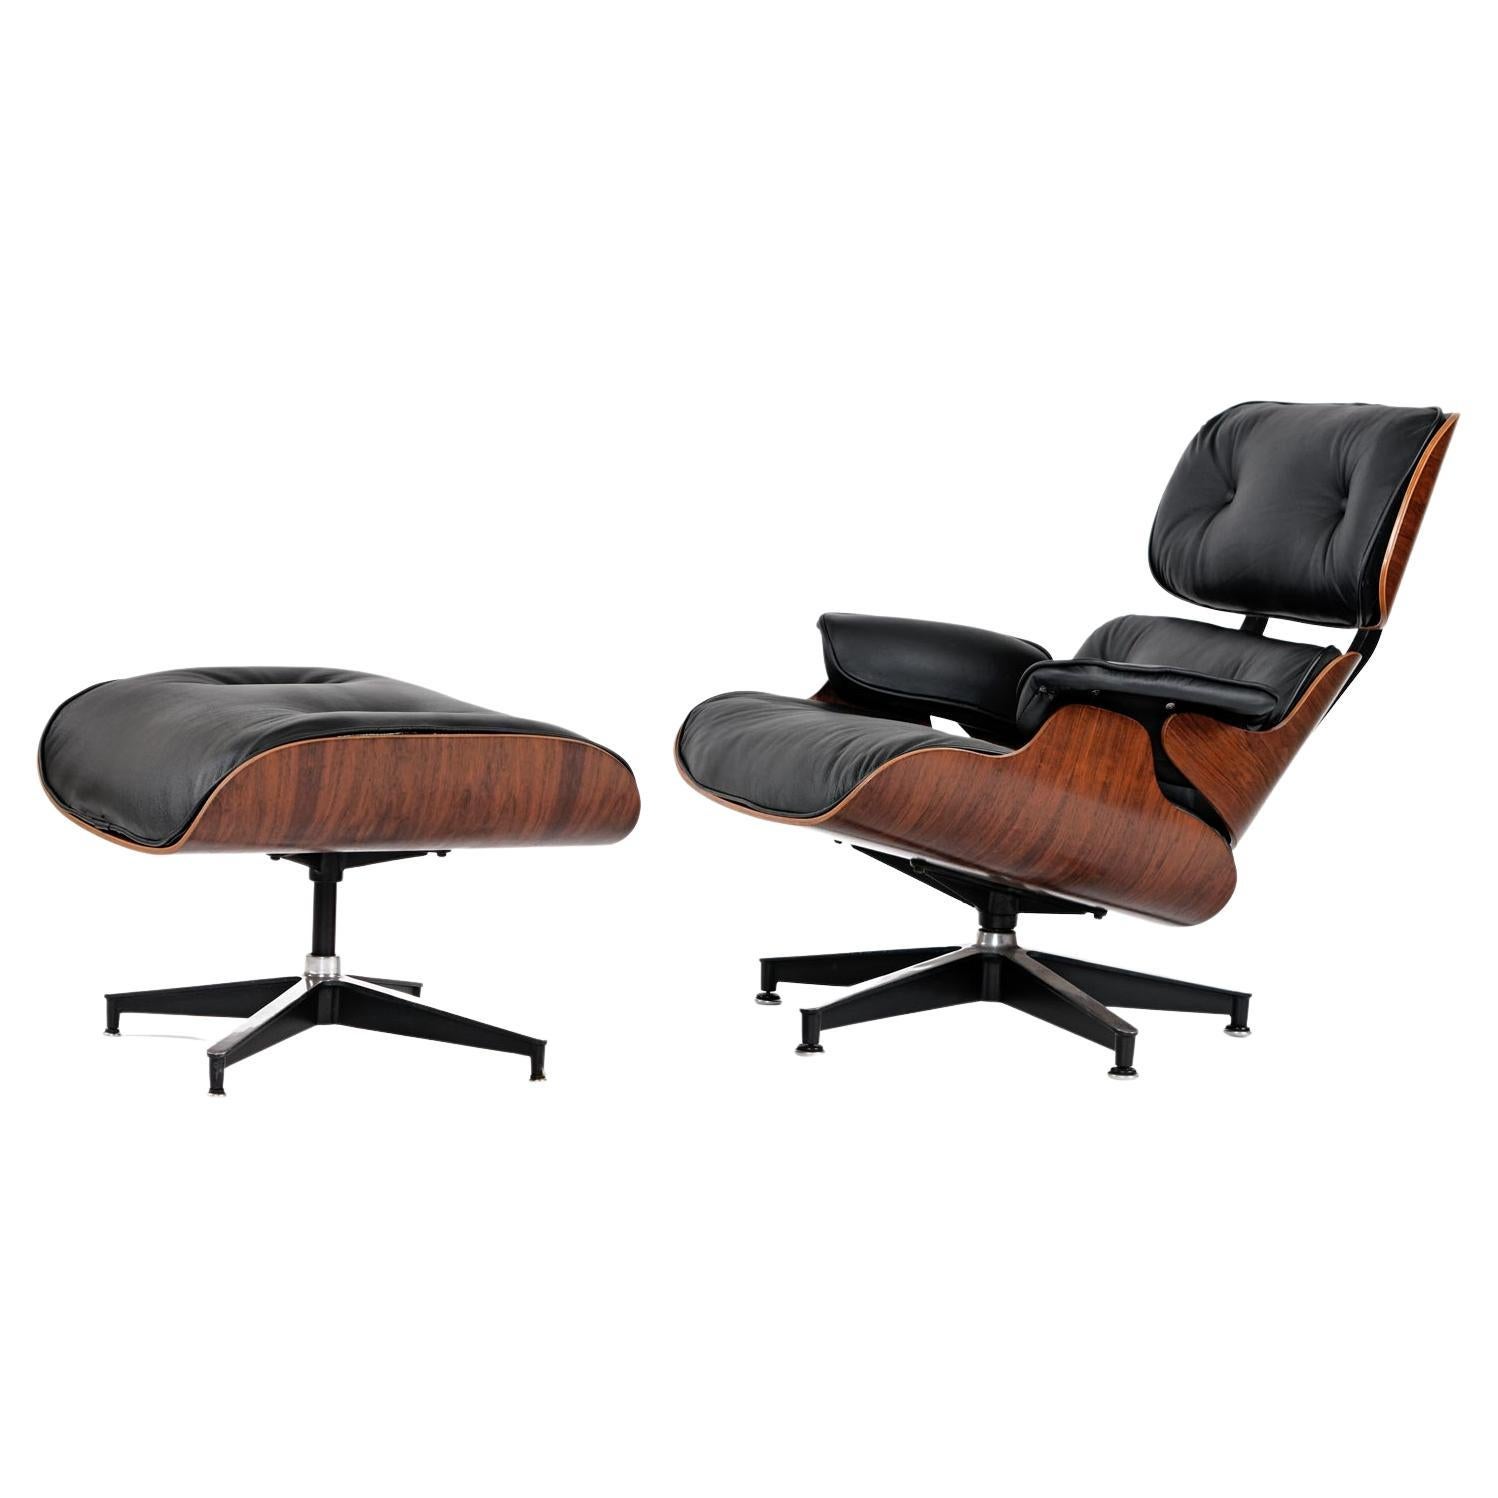 Early Rosewood Eames Lounge Chair and Ottoman by Herman Miller in Black Leather